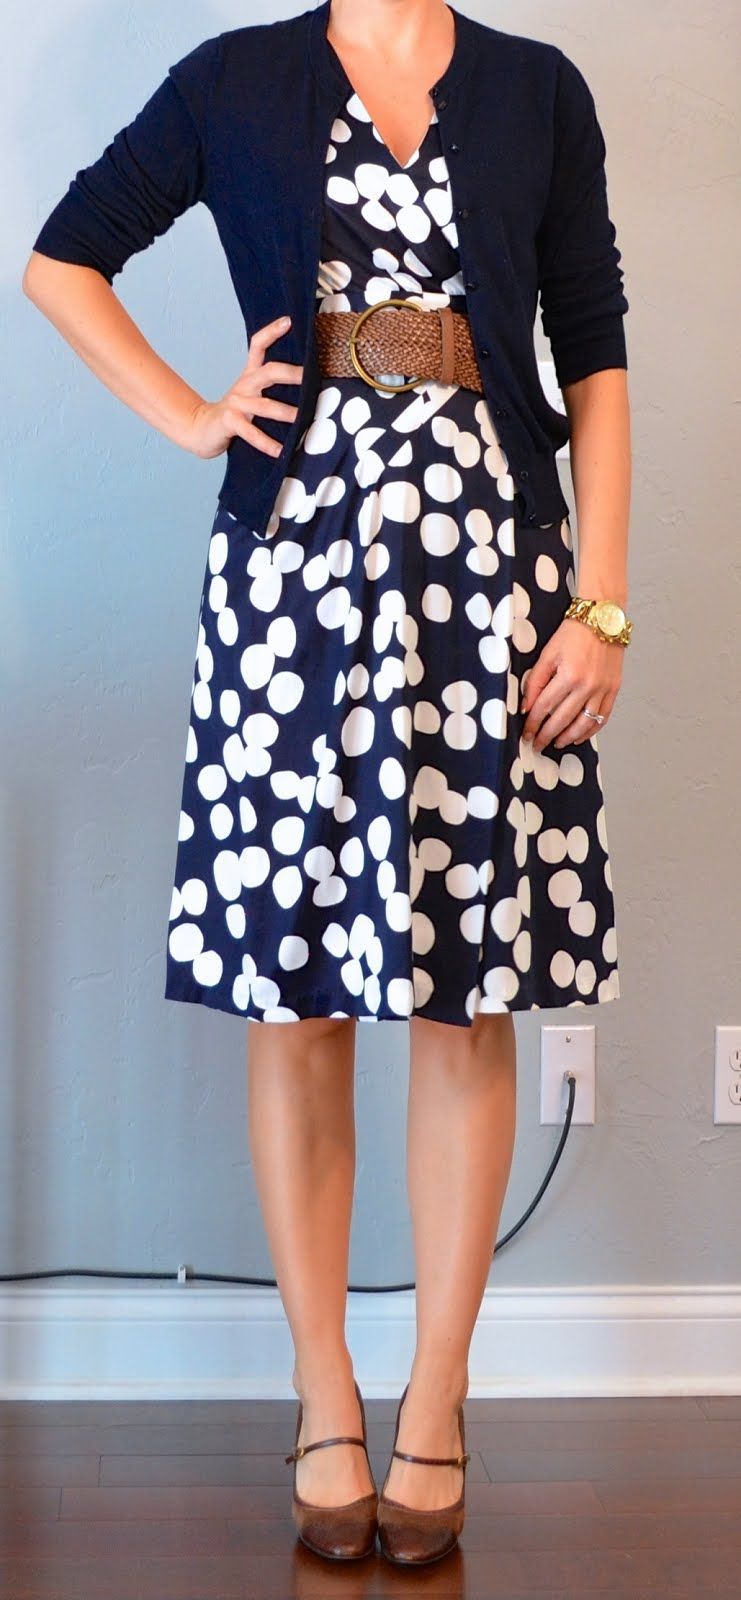 navy & white polka-dot dress, navy cardigan, wide woven belt  Will someone find all this for me and buy it? I LOOOOVE This!